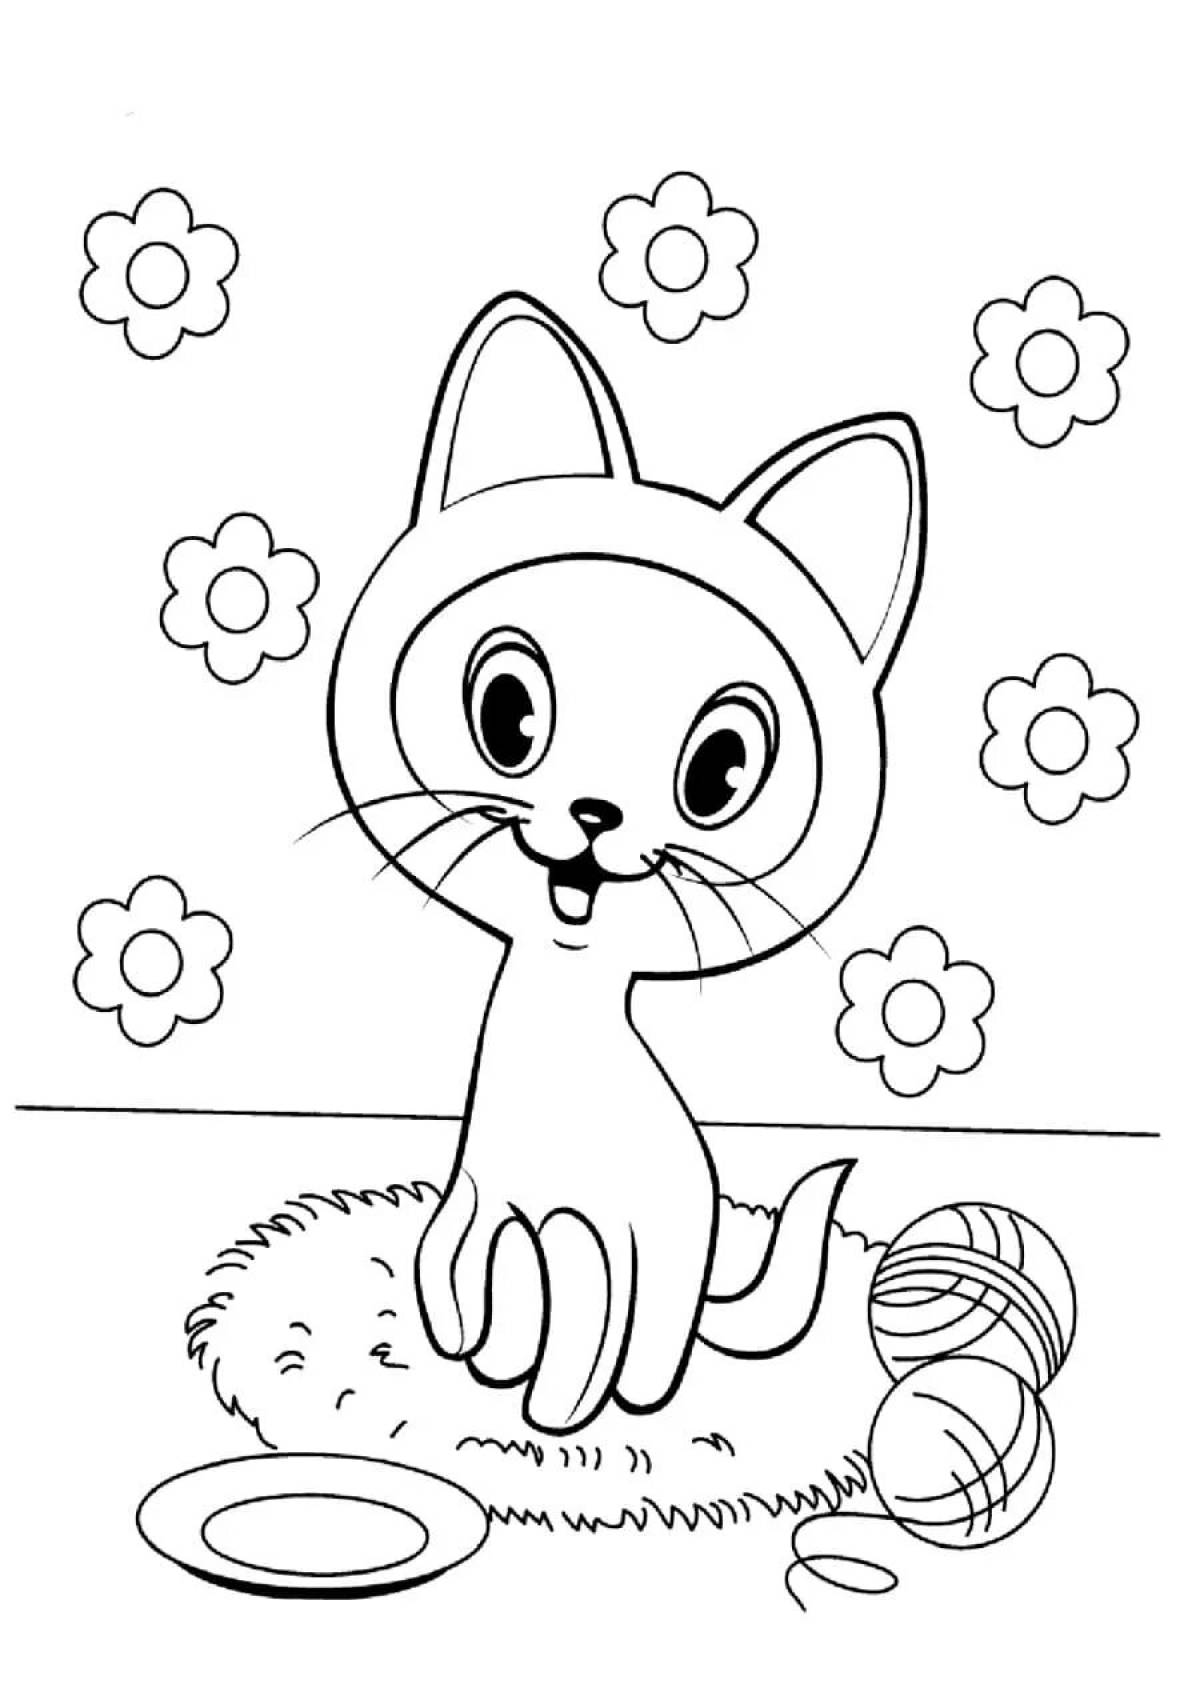 Kitty shining coloring book for kids 5-6 years old